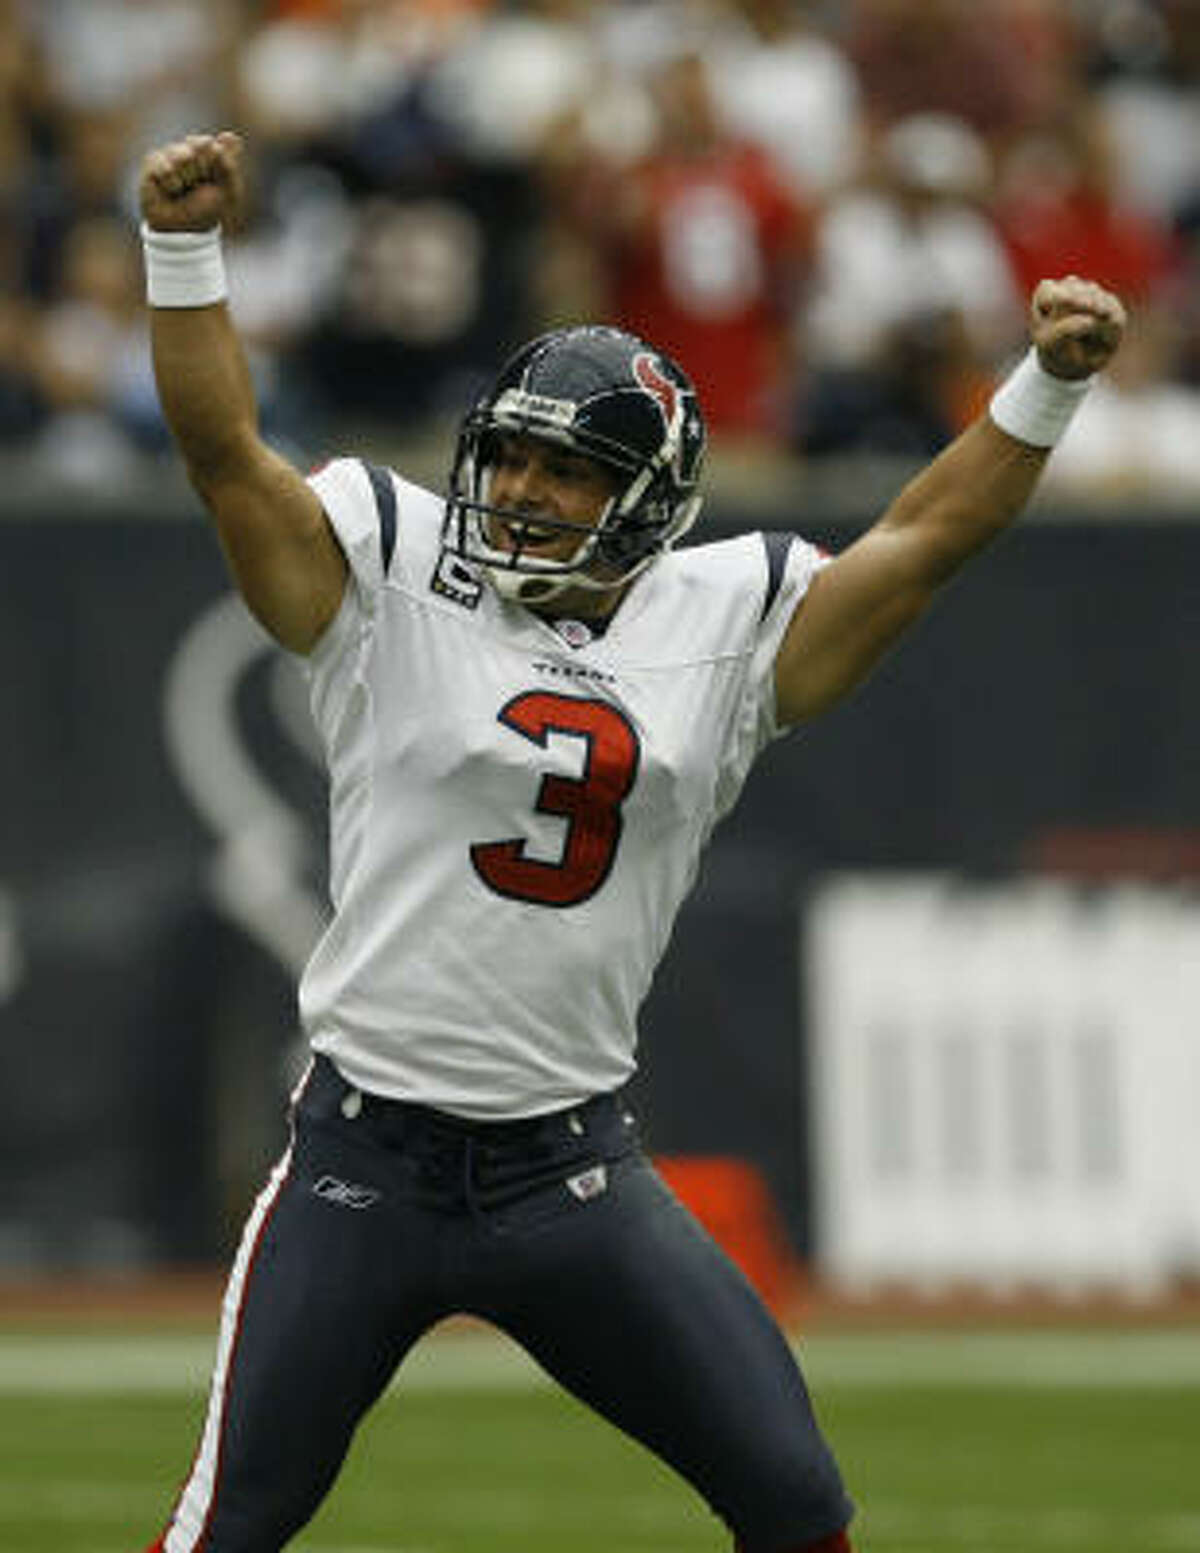 Texans kicker Kris Brown celebrates after making a 54 yard field goal, the longest in franchise history, which he would tie a quarter later.